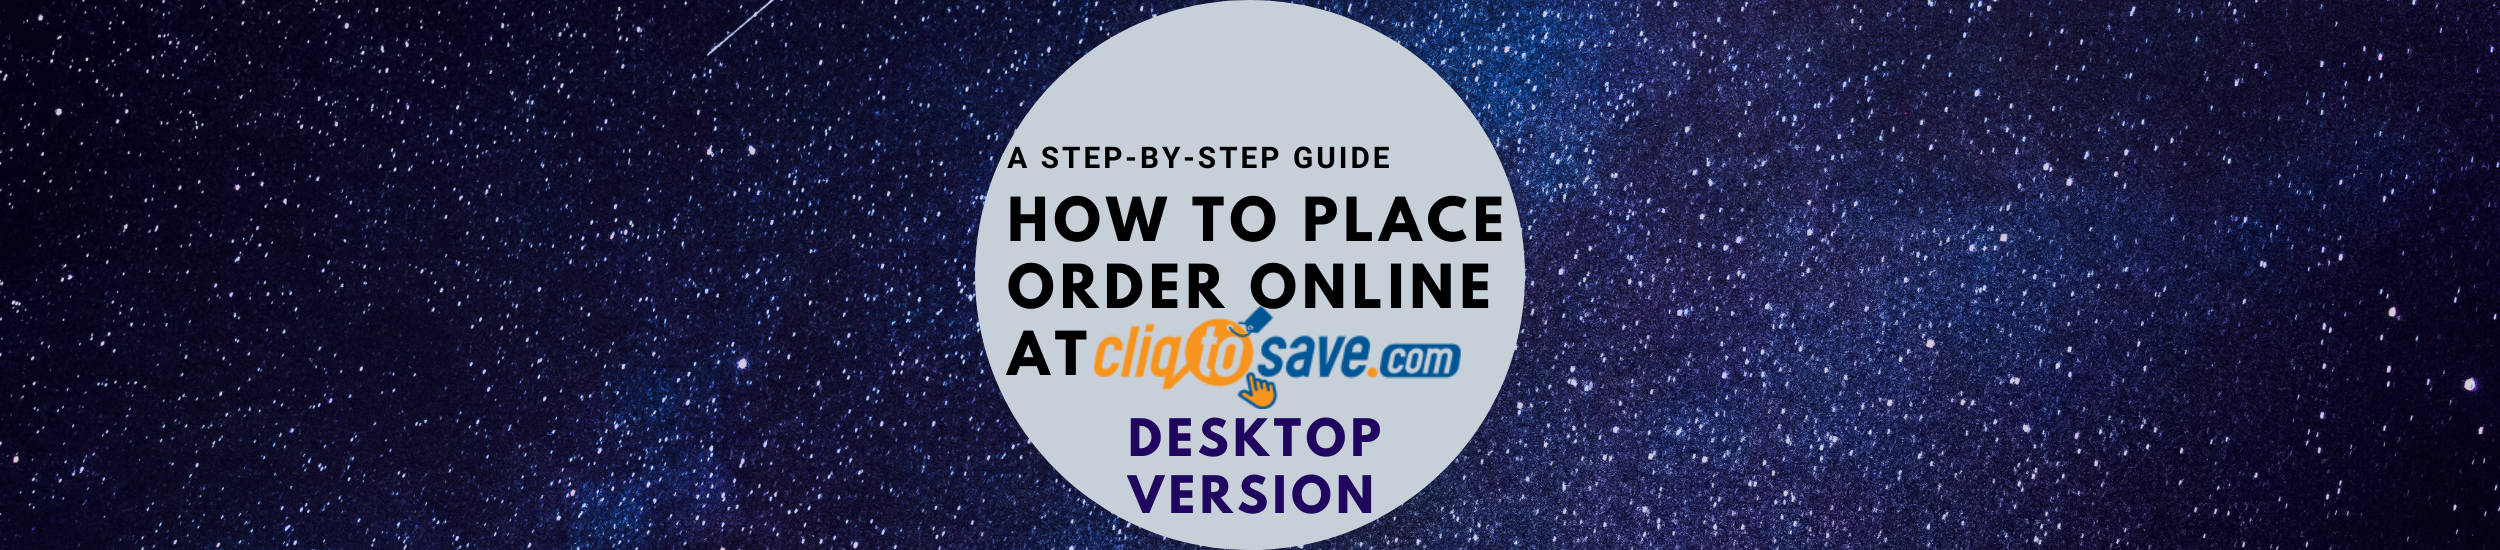 How to Place Order at Cliqtosave (Desktop Version)